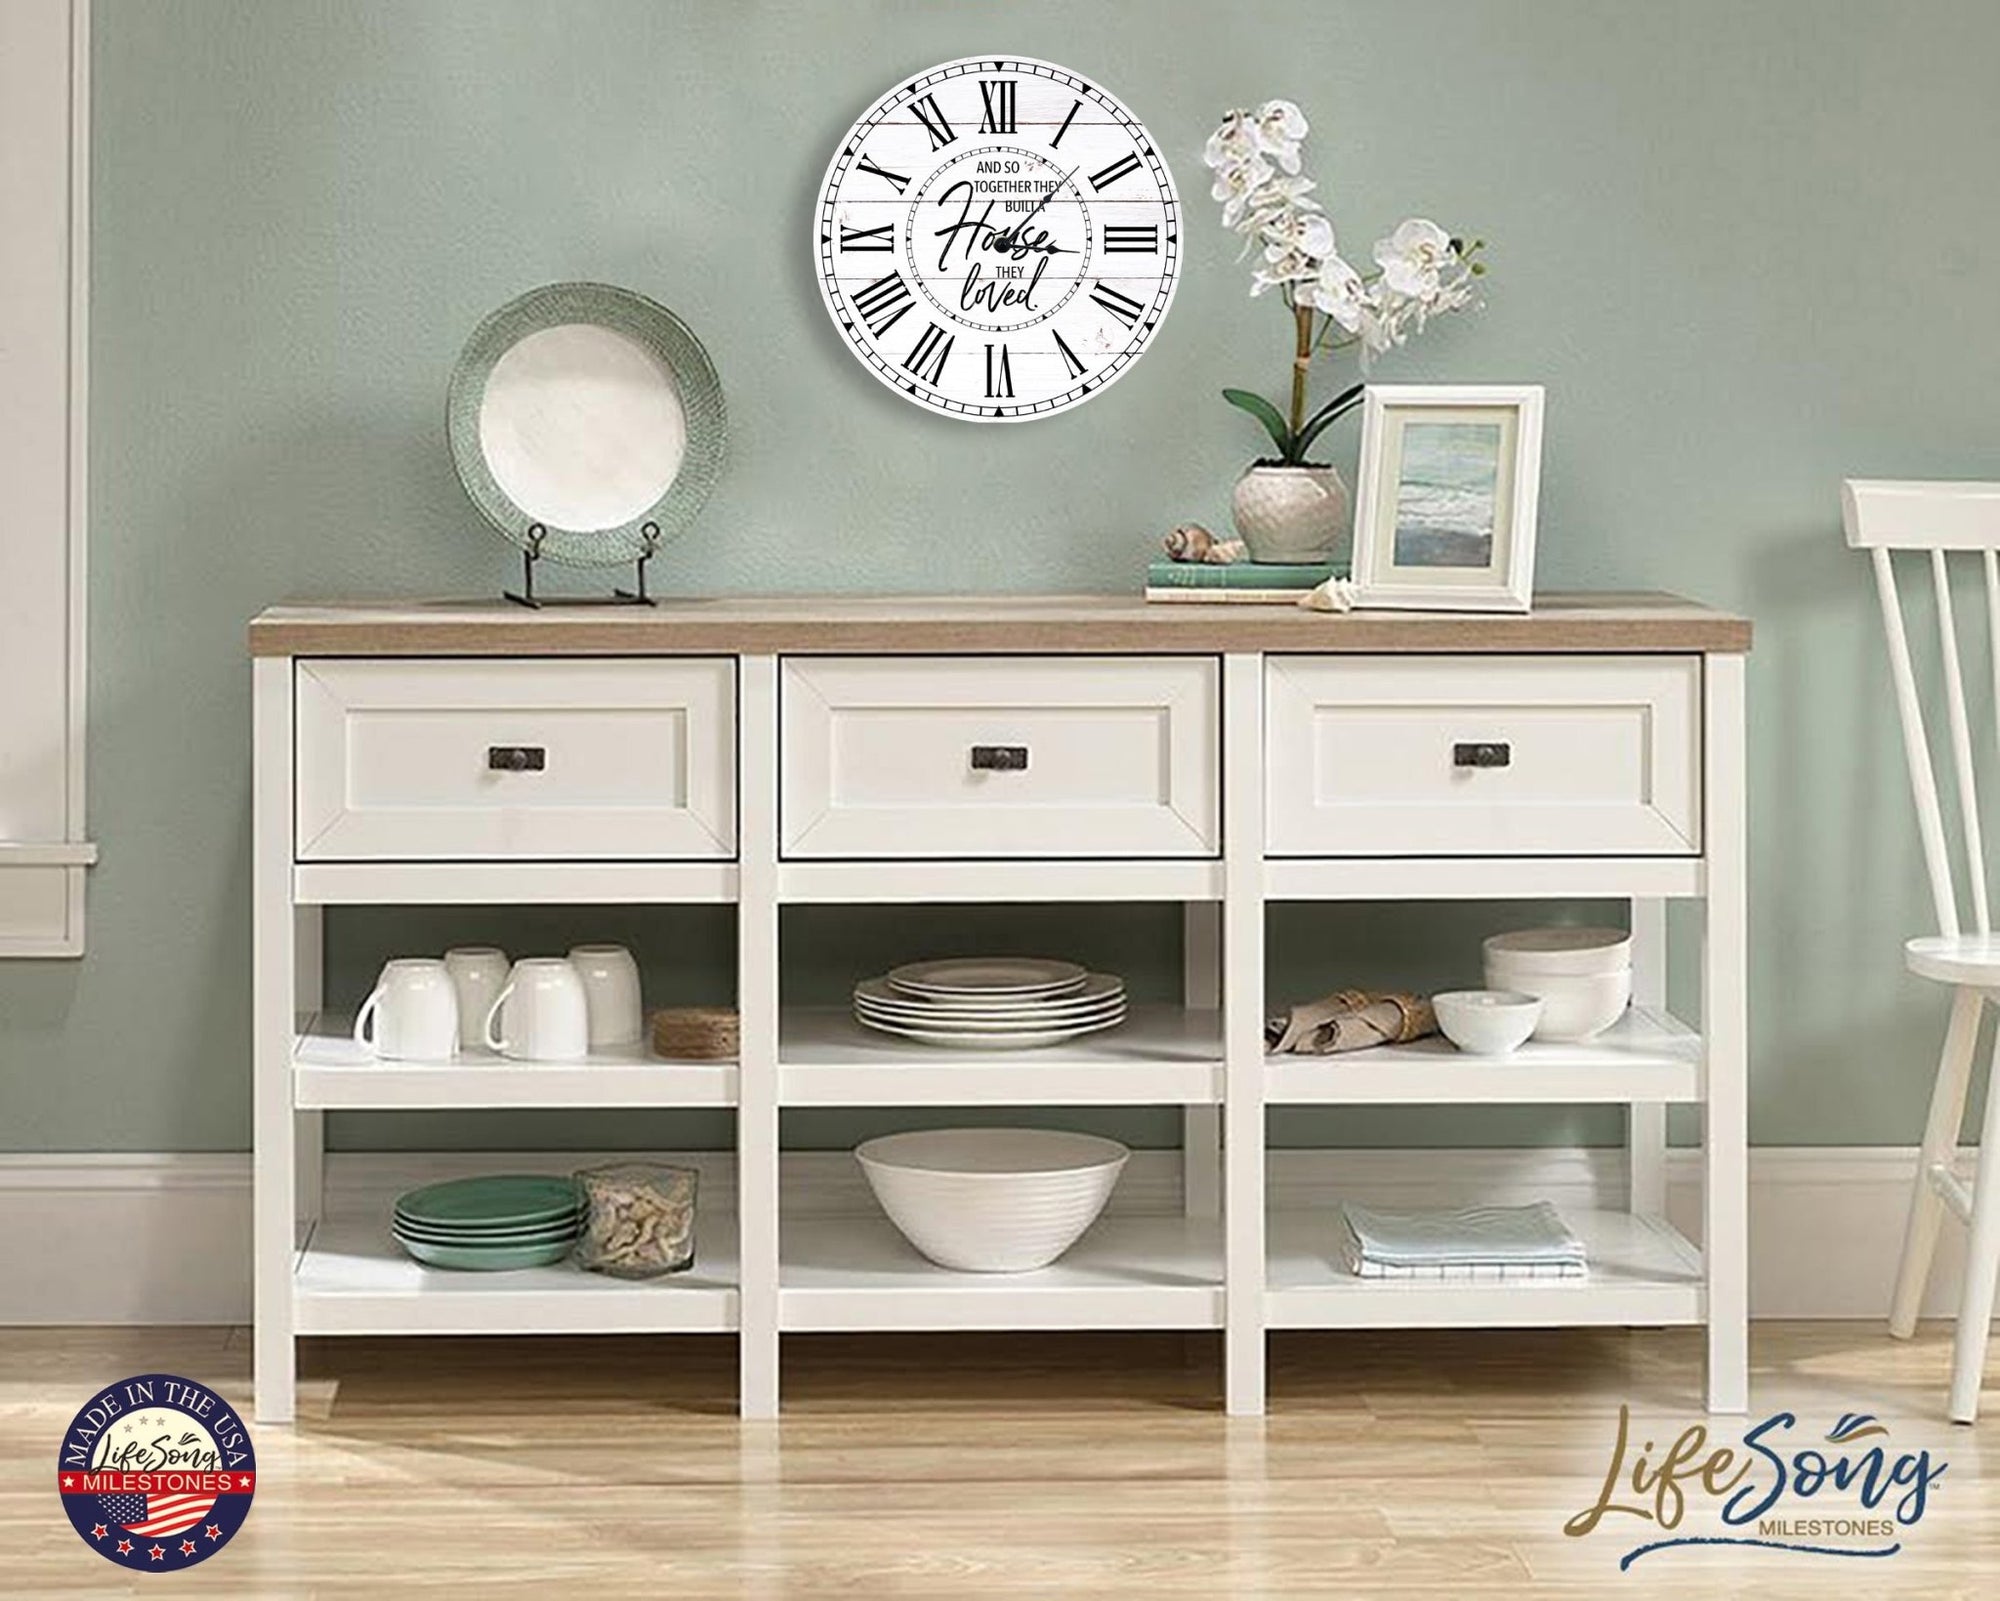 Everyday Home and Family Clock 12” x .0125” And So Together - LifeSong Milestones